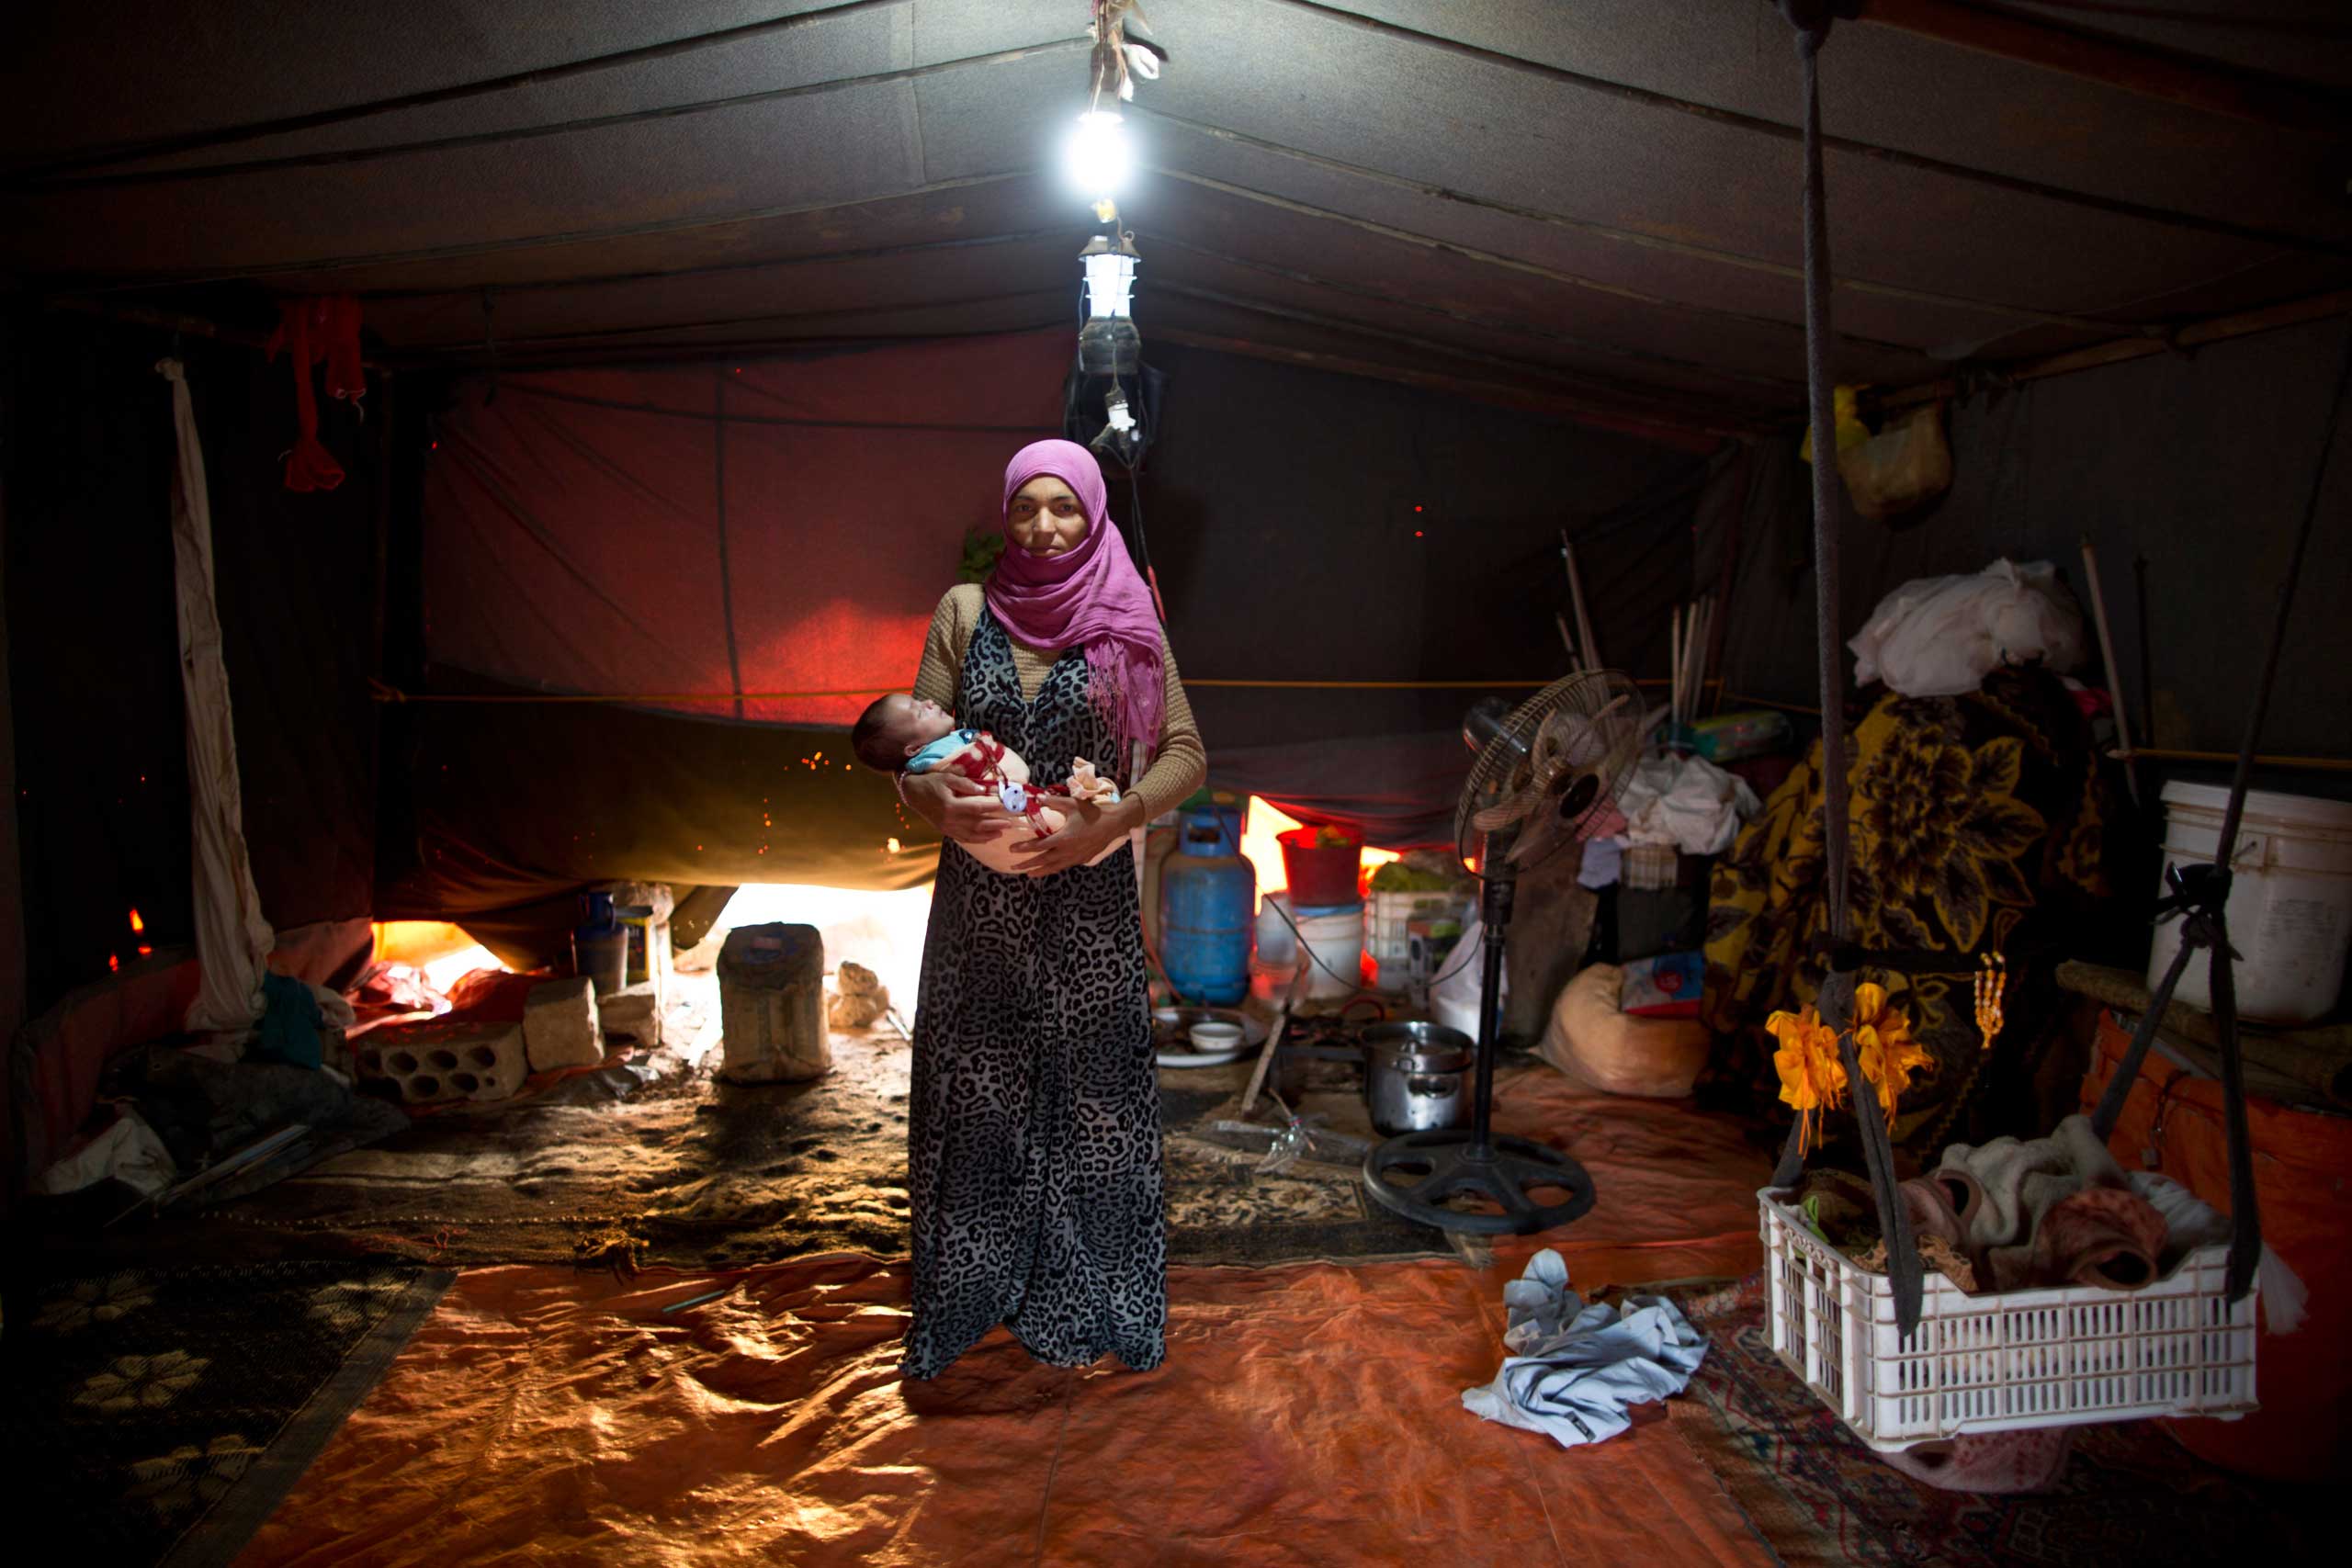 Wazeera Elaiwi, 29, holds her 2-month-old son Mohammed, on Aug. 11, 2015.